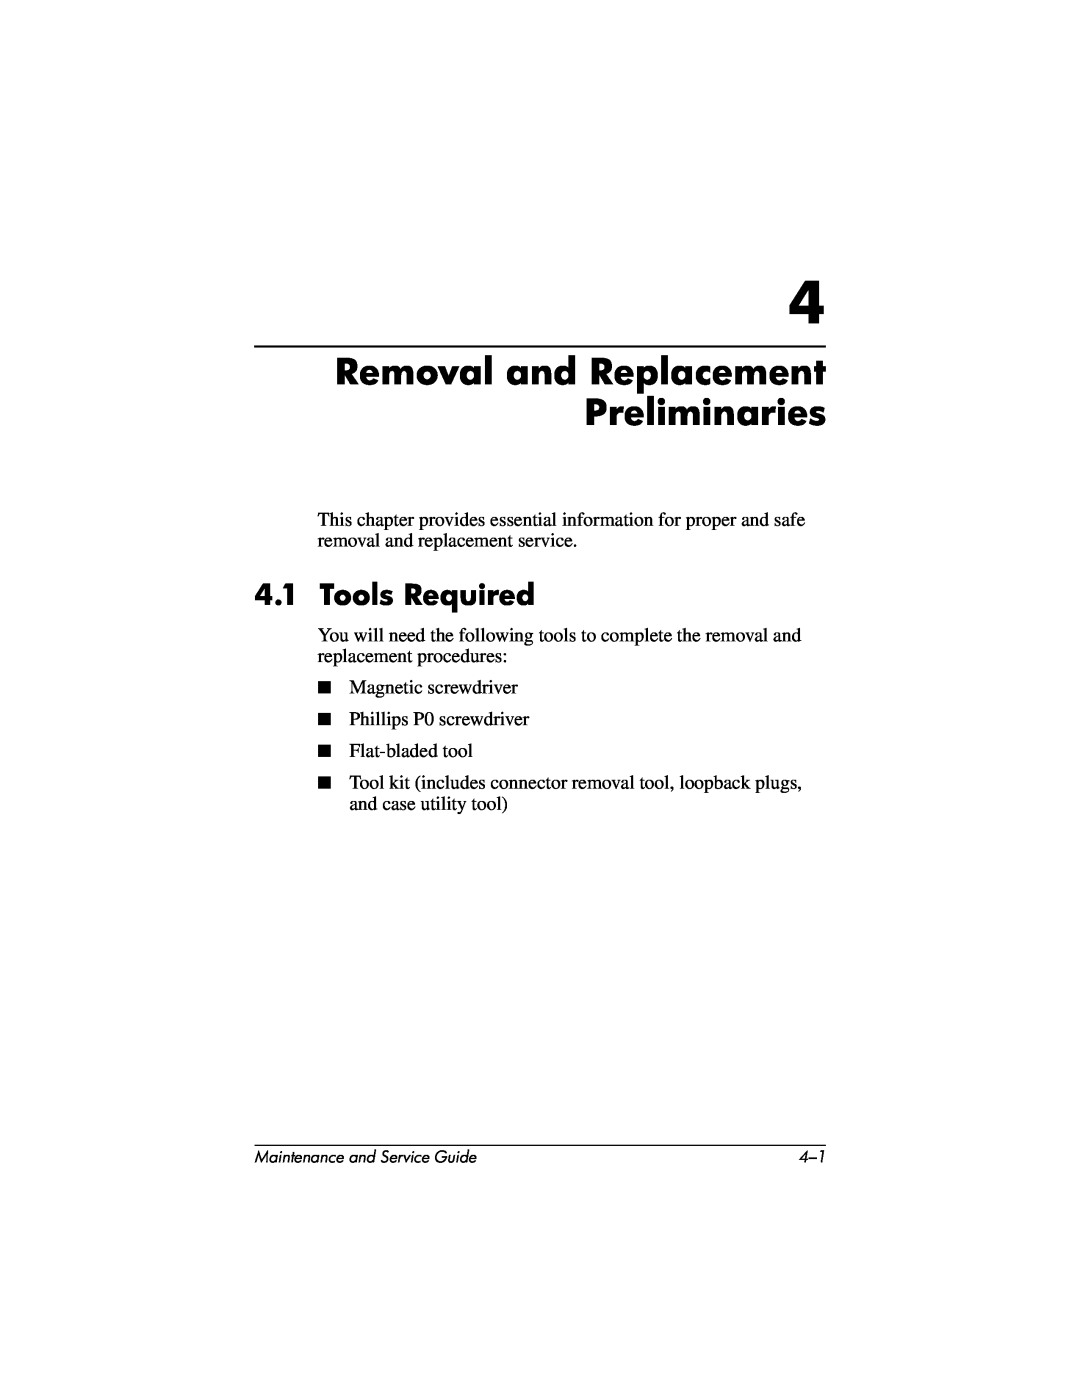 HP X1000, nx7000 manual Removal and Replacement Preliminaries, Tools Required 